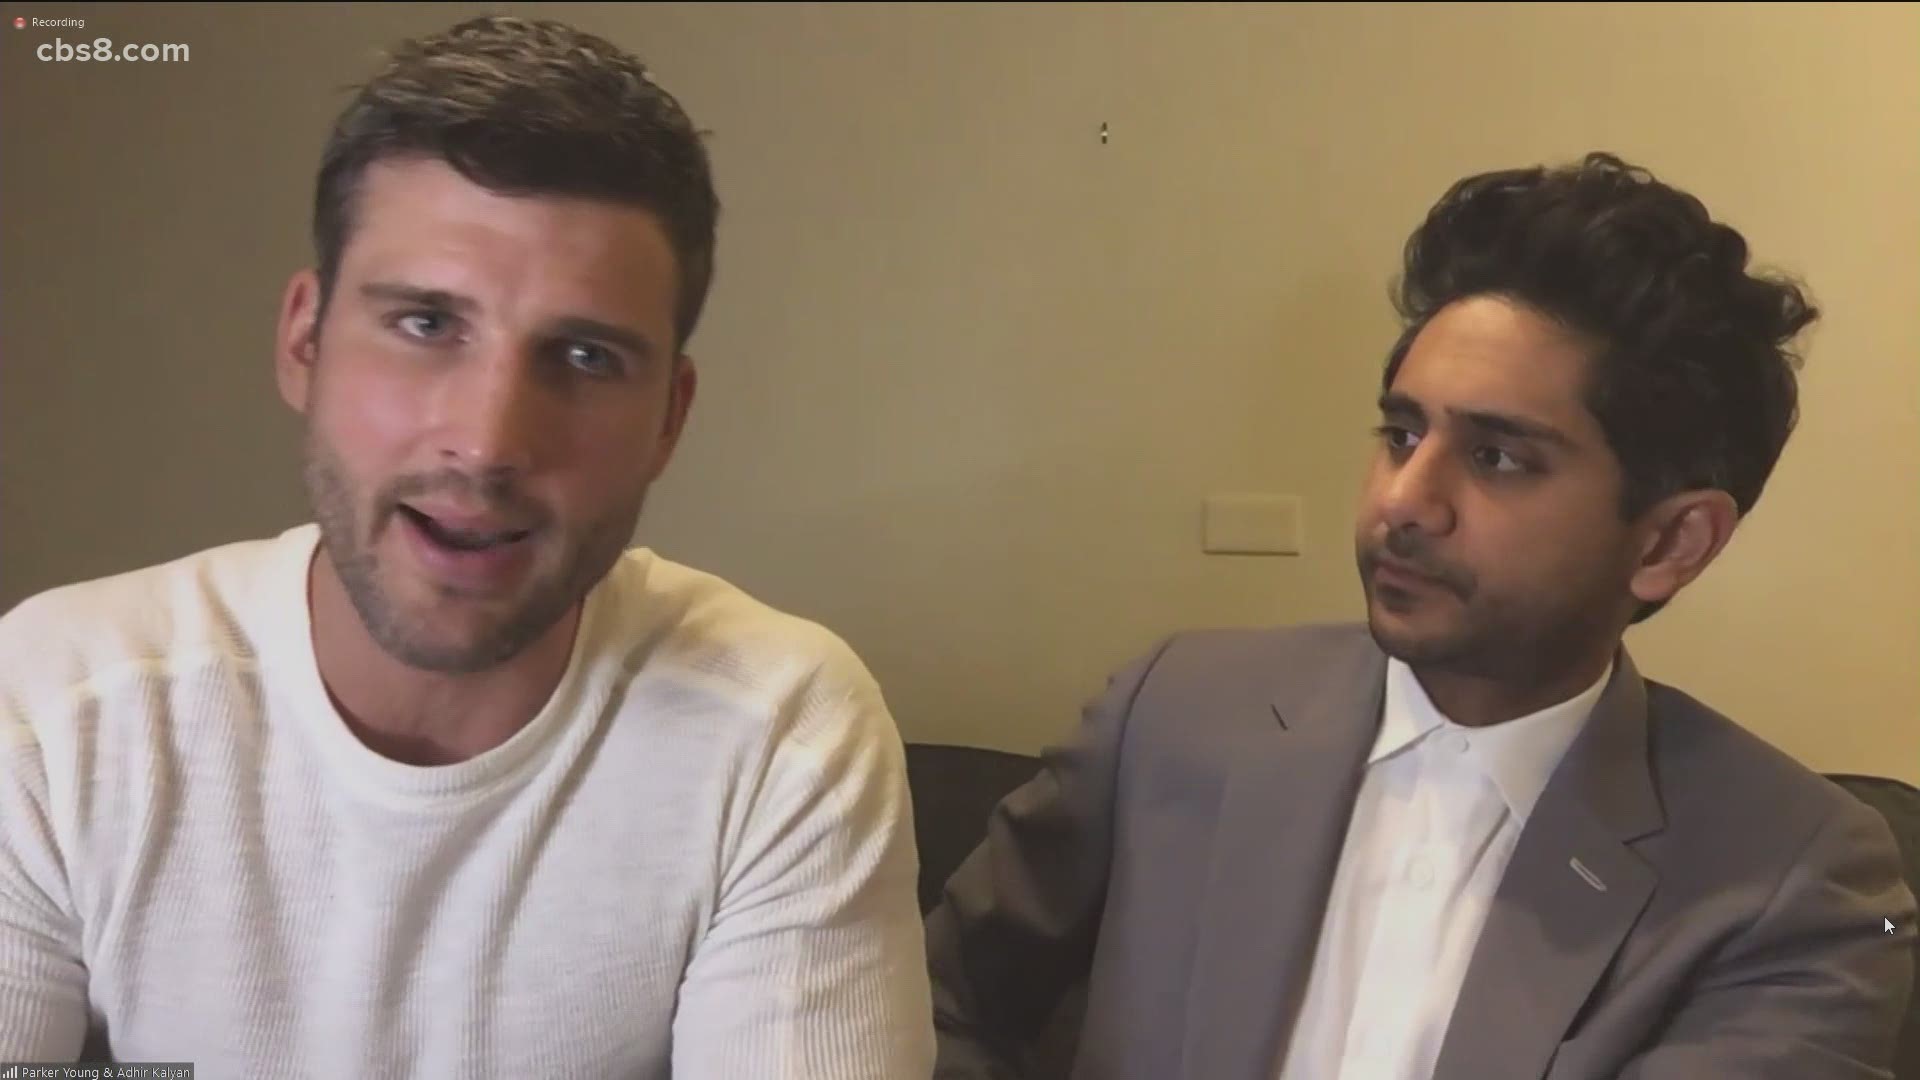 Actor Adhir Kalyan and Parker Young joined Morning Extra to talk about what the show is about.